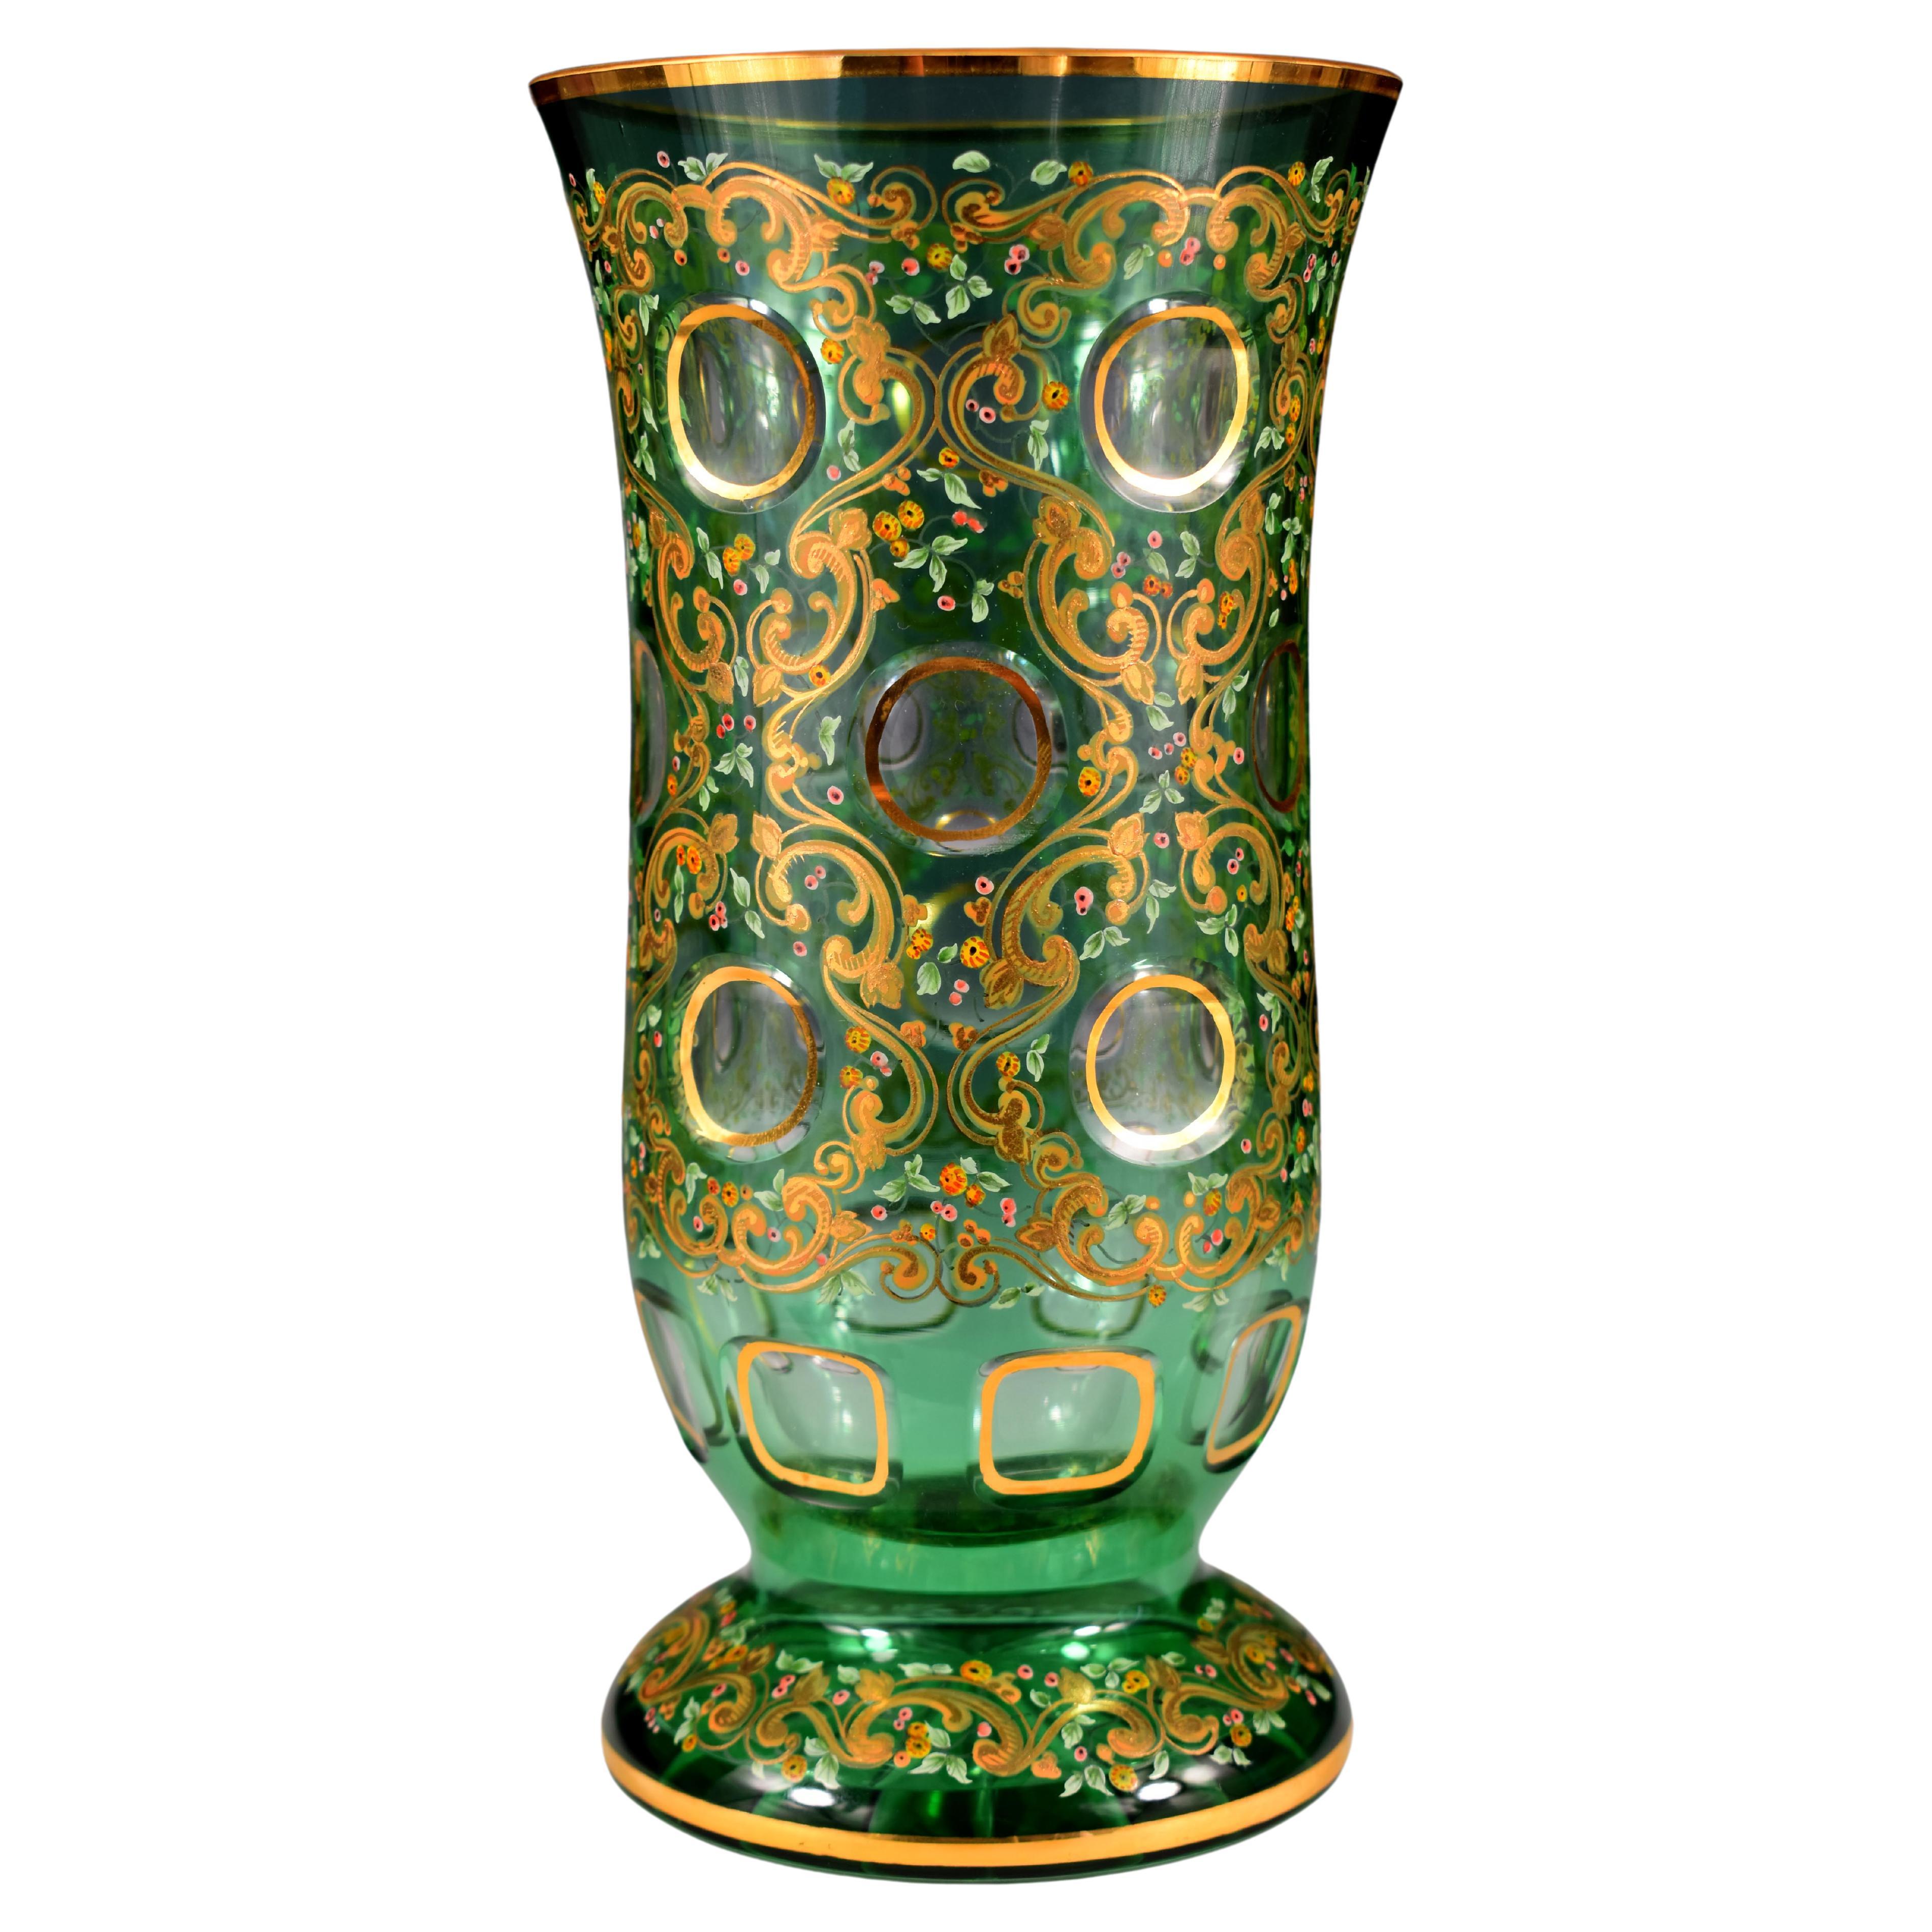 Painted Vase - Overlay Green Glass - 20th Century Bohemian Glass For Sale